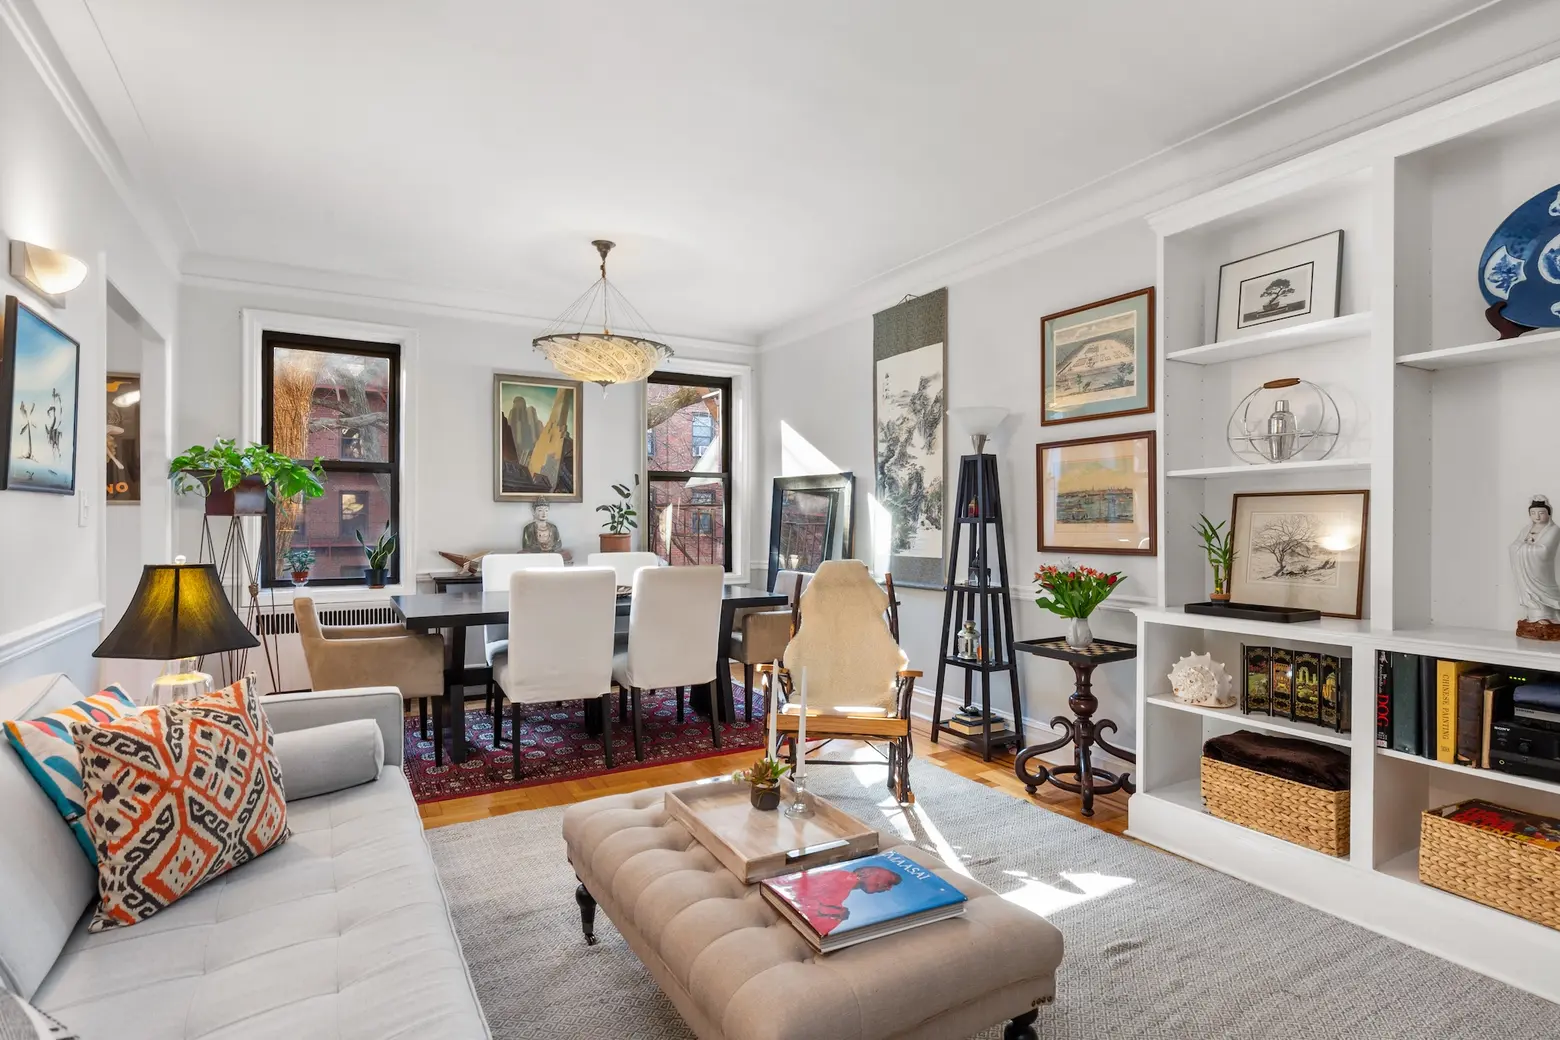 For $985K, this Windsor Terrace co-op offers three bedrooms, Deco details, and Prospect Park proximity